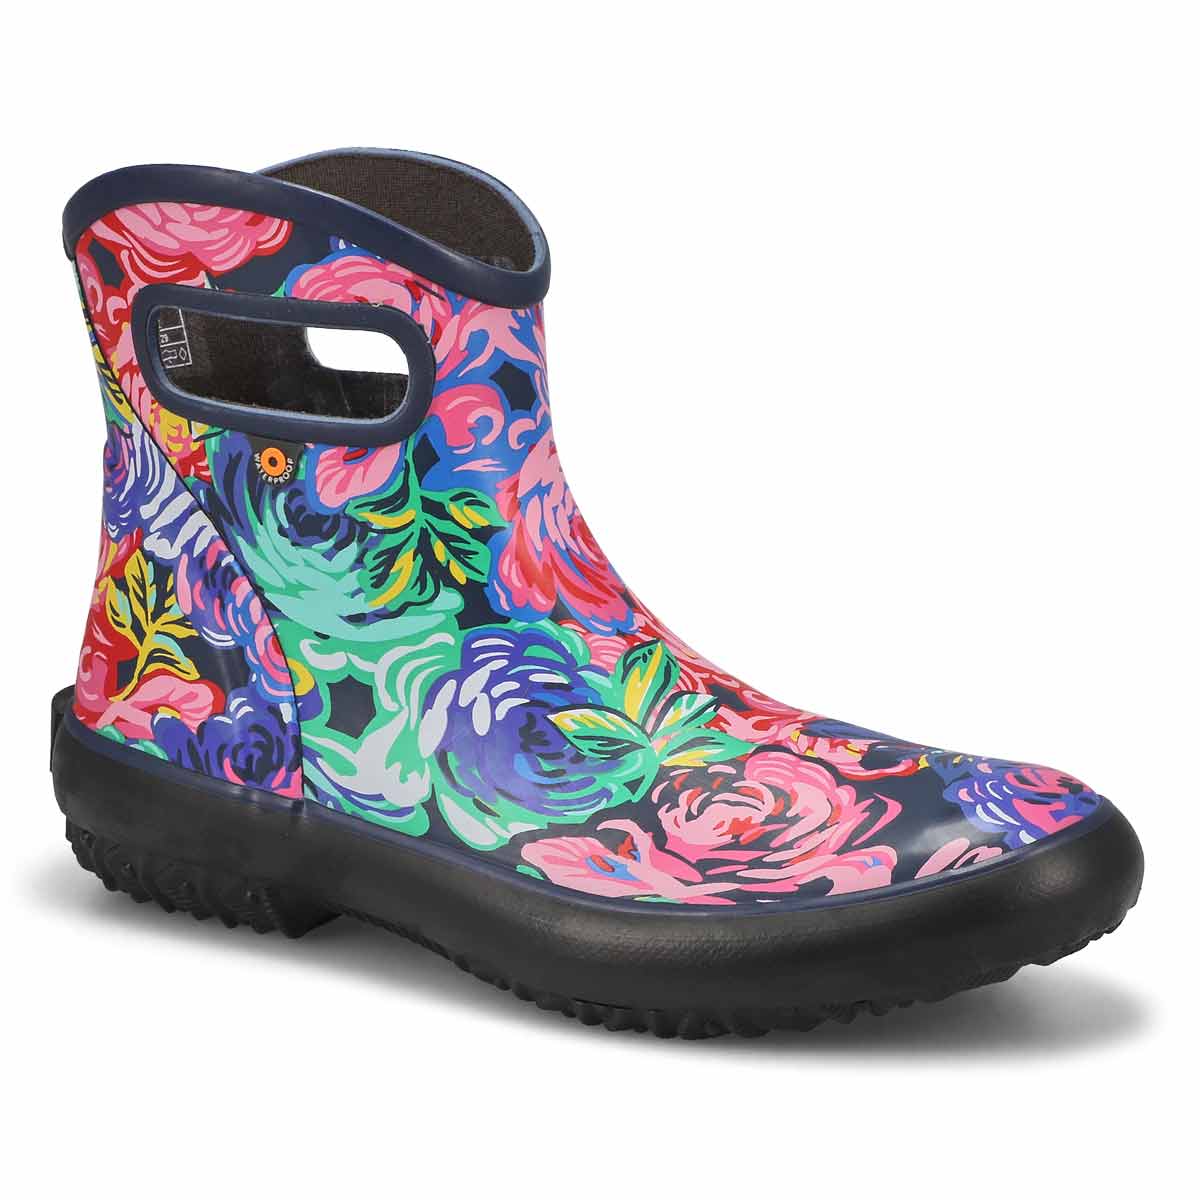 Bogs Women's Patch Ankle Rain Boot - Rose Mul | SoftMoc.com